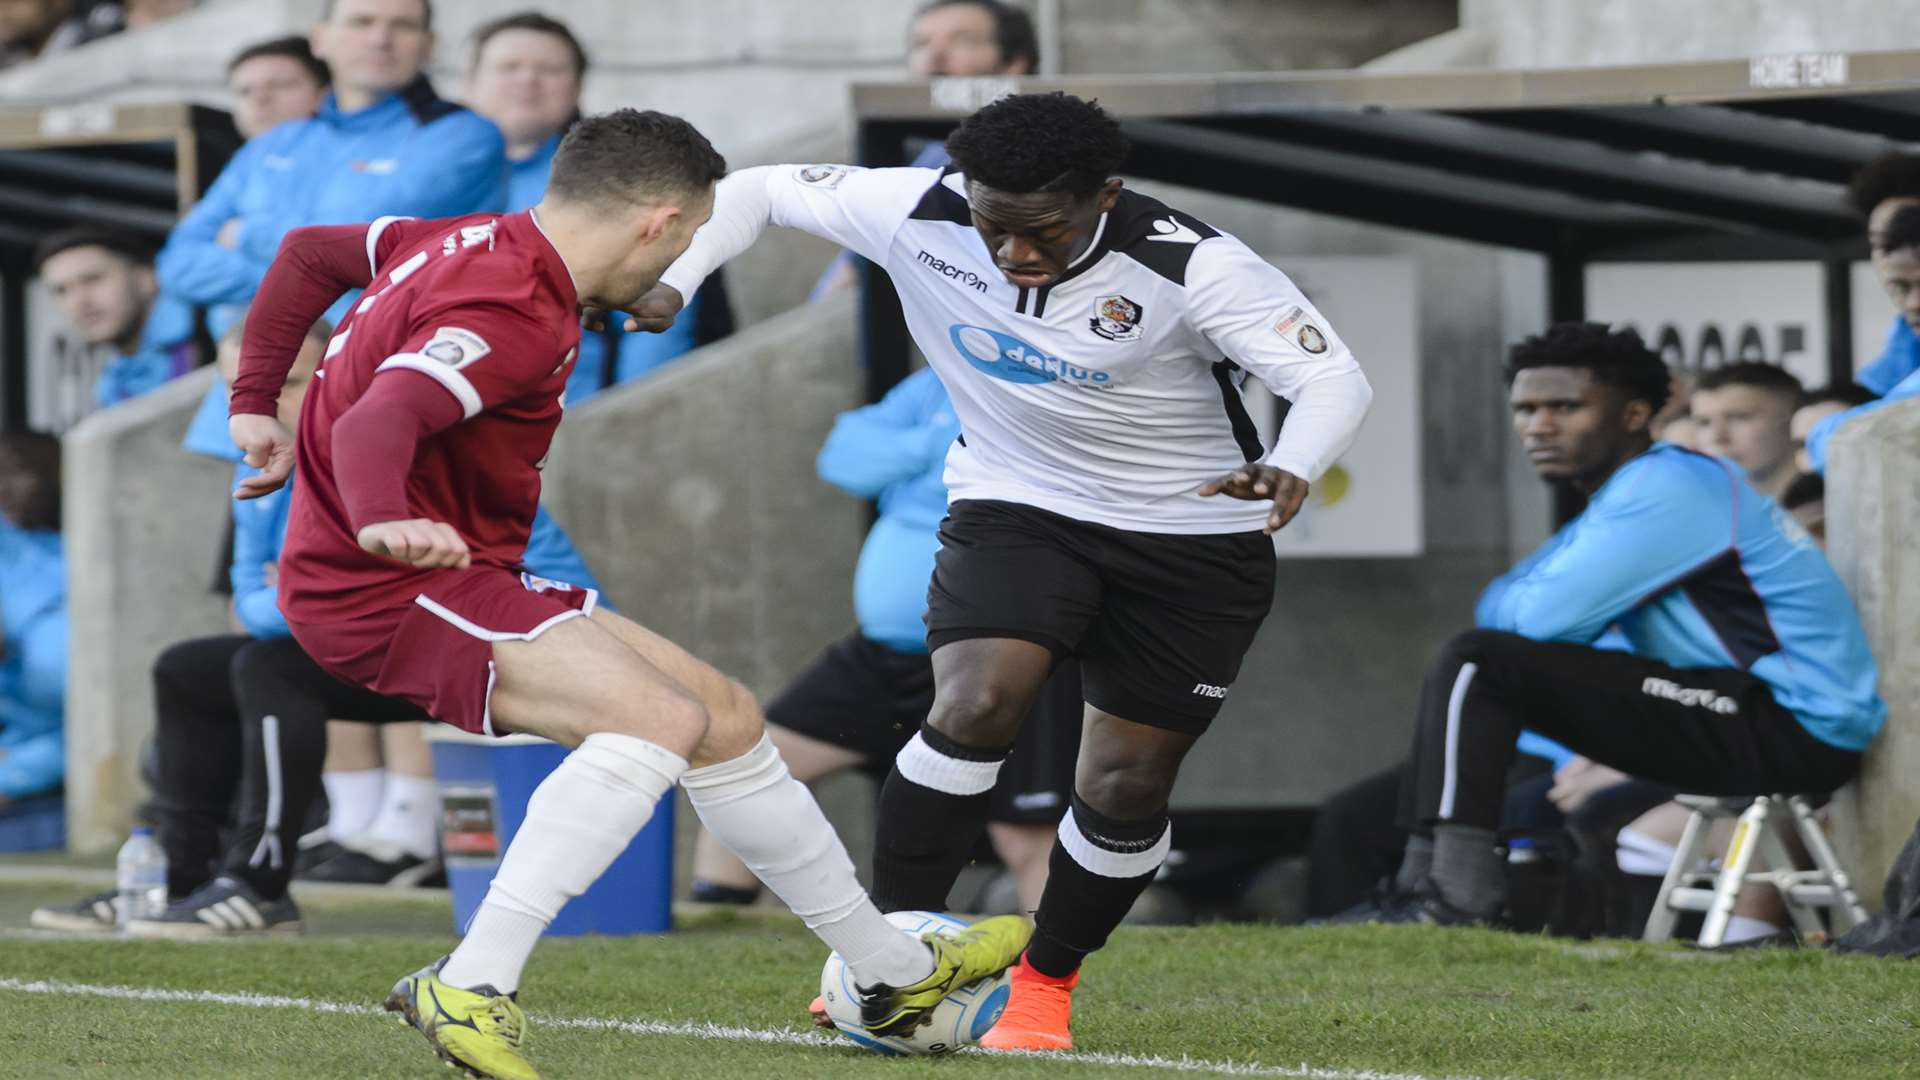 Luke Wanadio left Dartford to sign for Bromley this summer Picture: Andy Payton